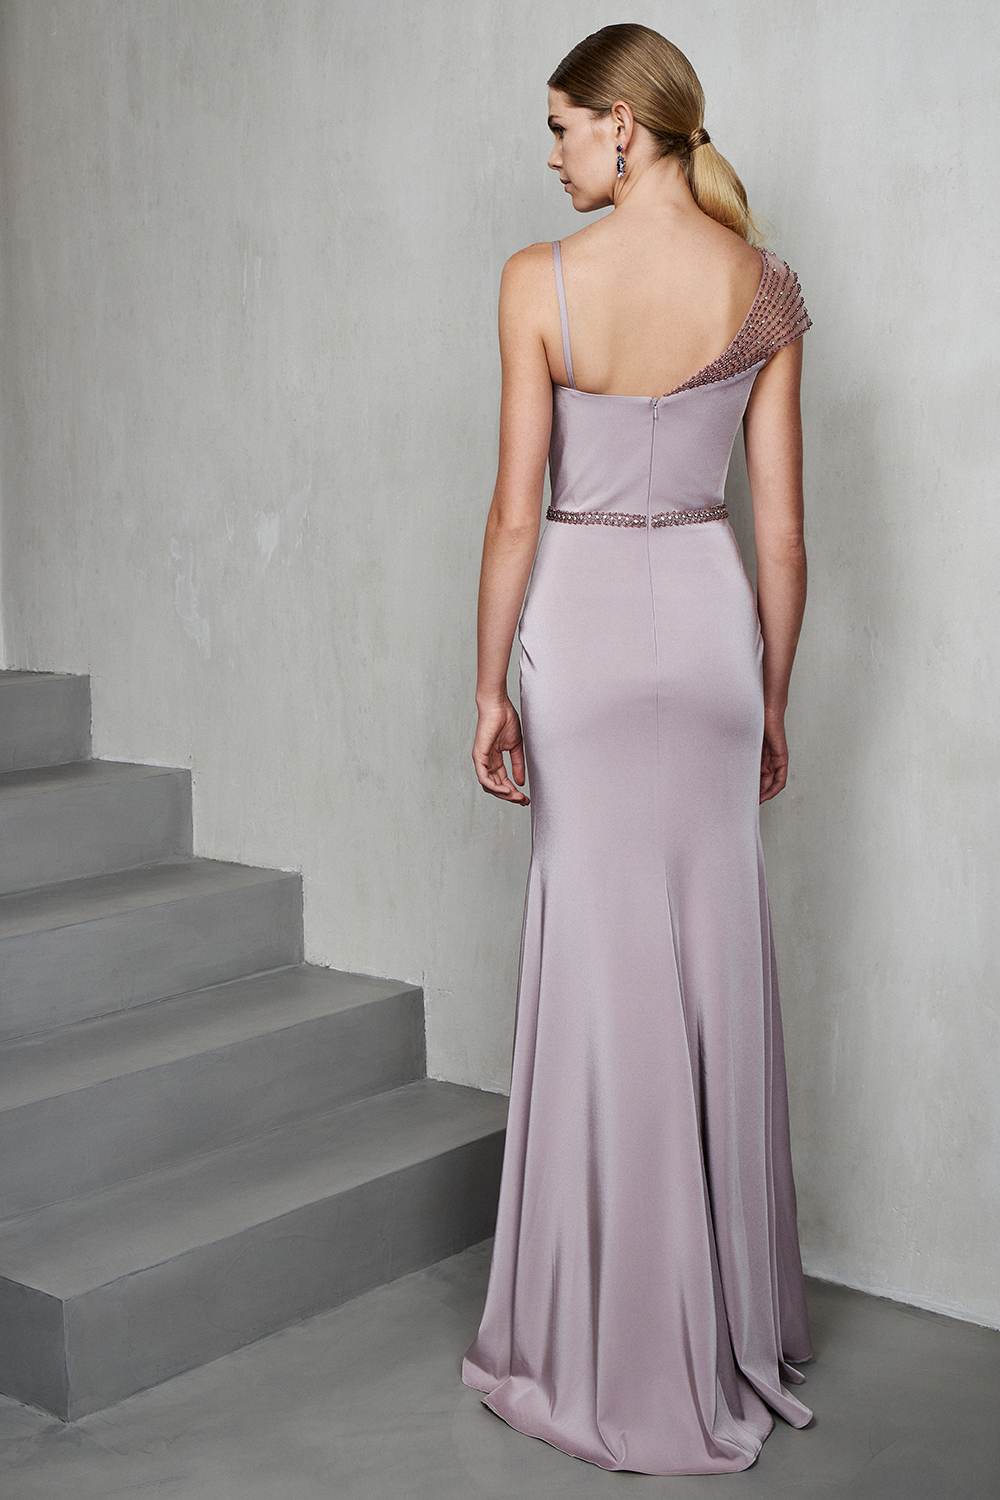 Evening Dresses / One shoulder long evening satin dress with beading and bow at the shoulder